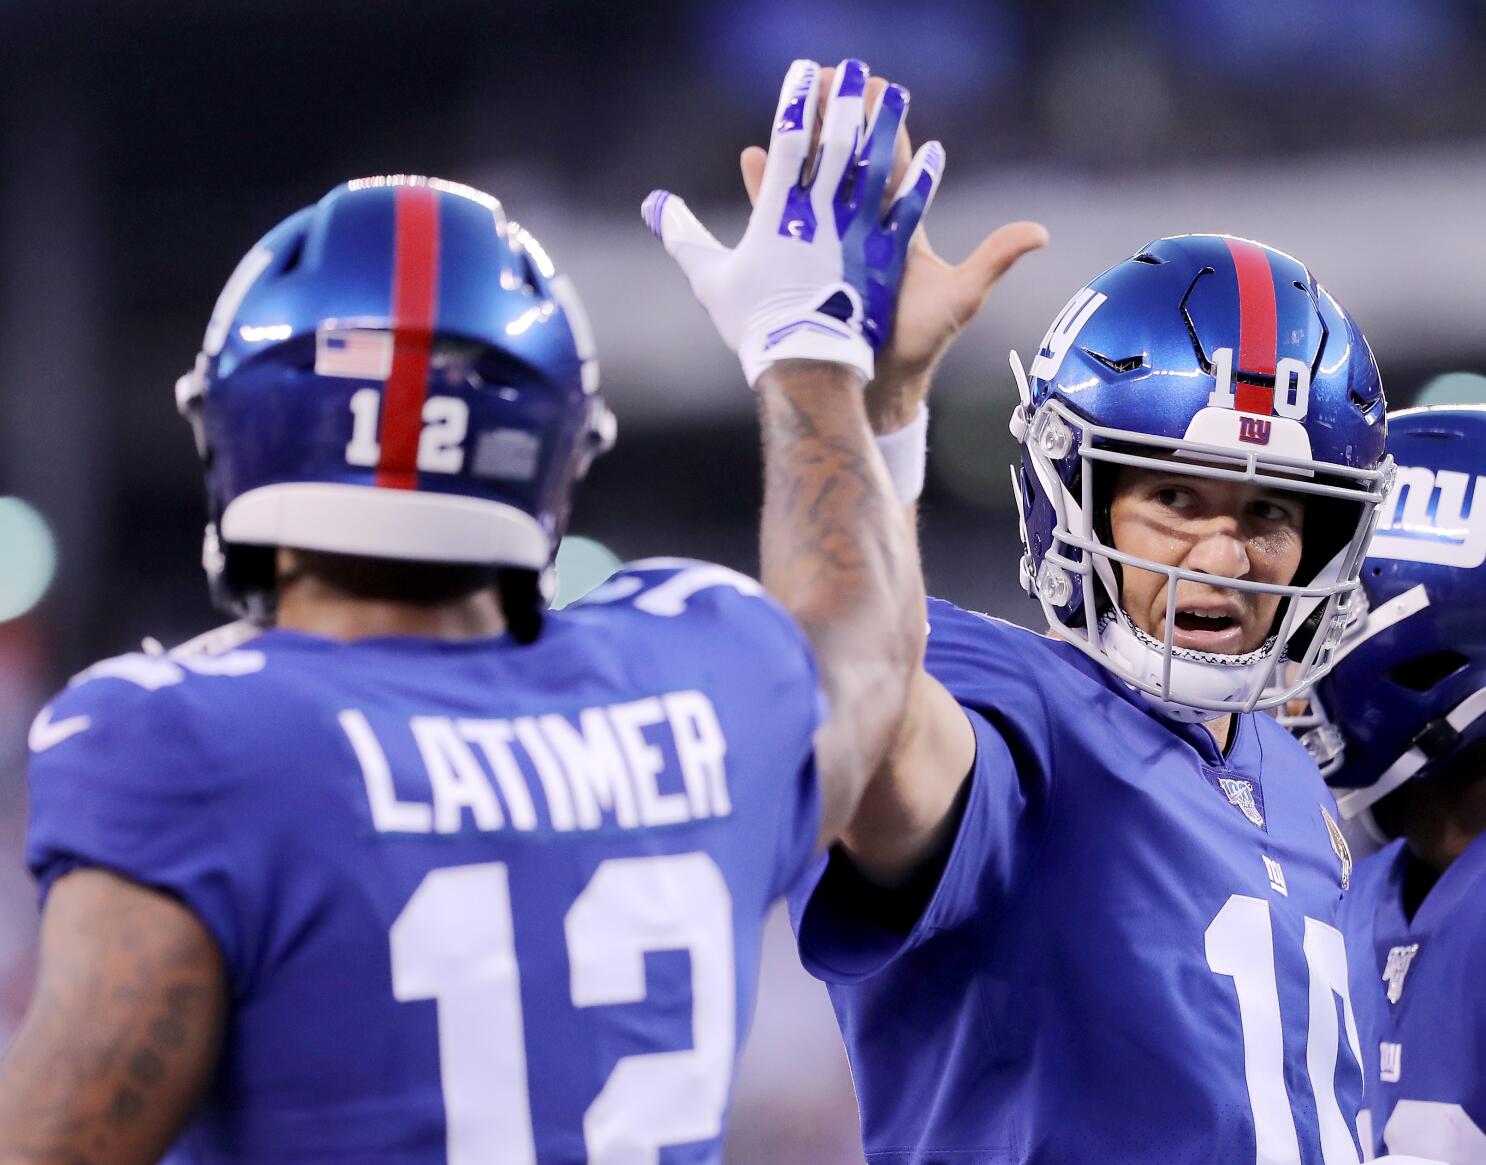 Giants-Eagles final score, recap: Giants embarrassed by Eagles, 48